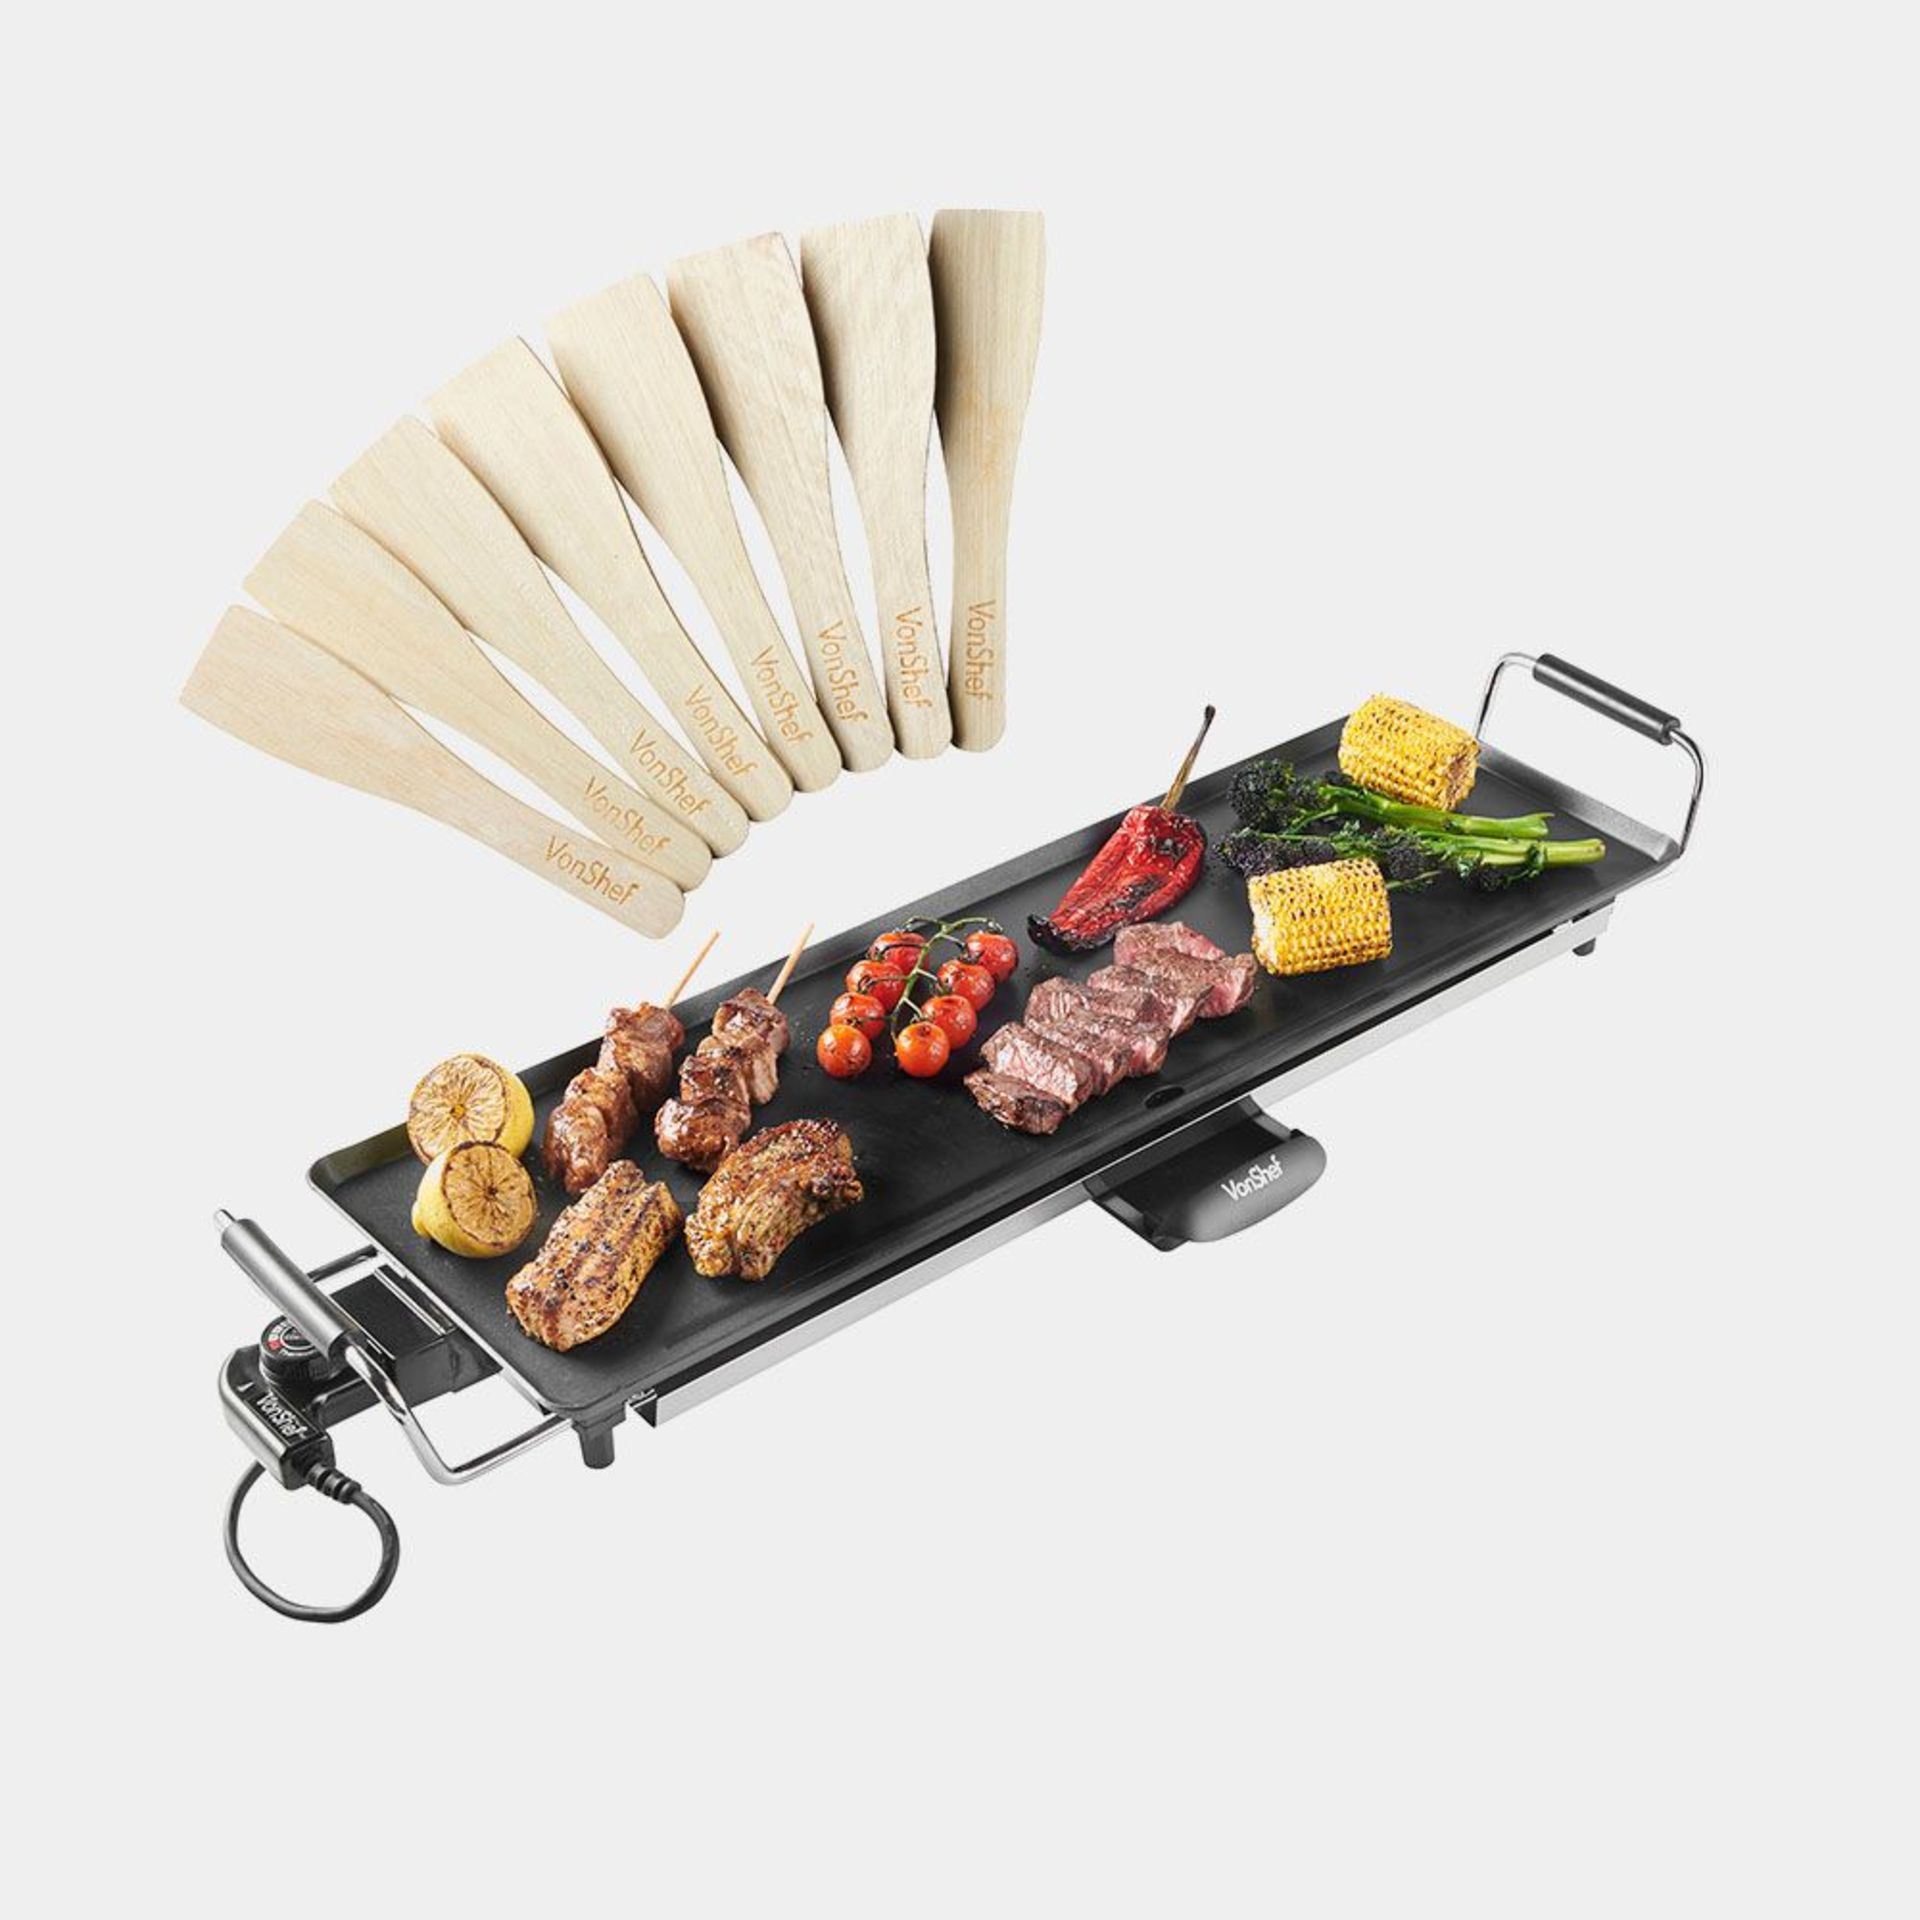 XL Teppanyaki Grill. - BI. Enjoy delicious, freshly cooked dishes with a Japanese twist using this